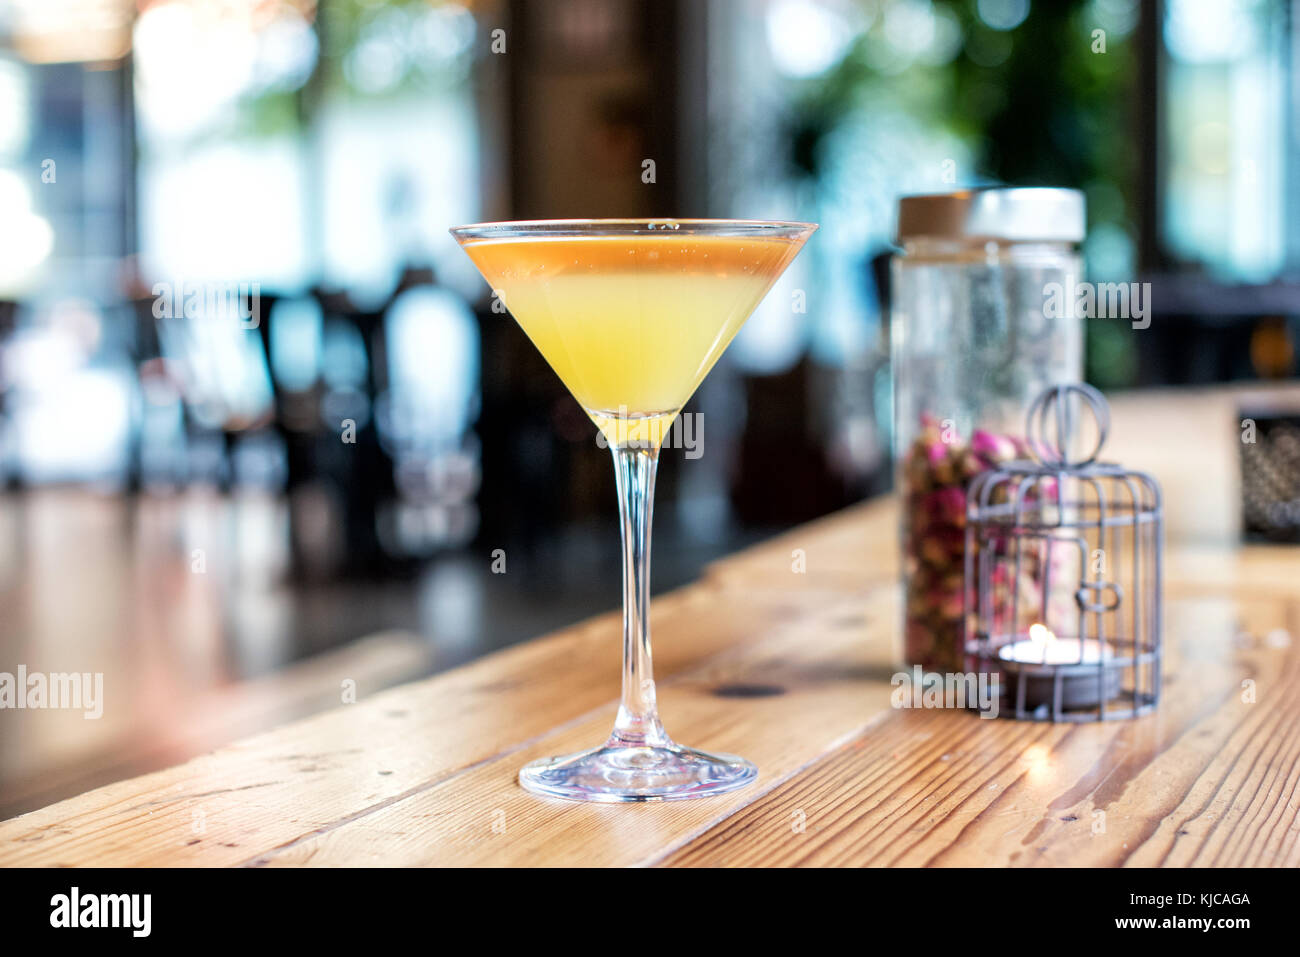 Close-up of a sweet yellow alcoholic cocktail in a stemmed glass on wood countertop in the interior of a bar Stock Photo